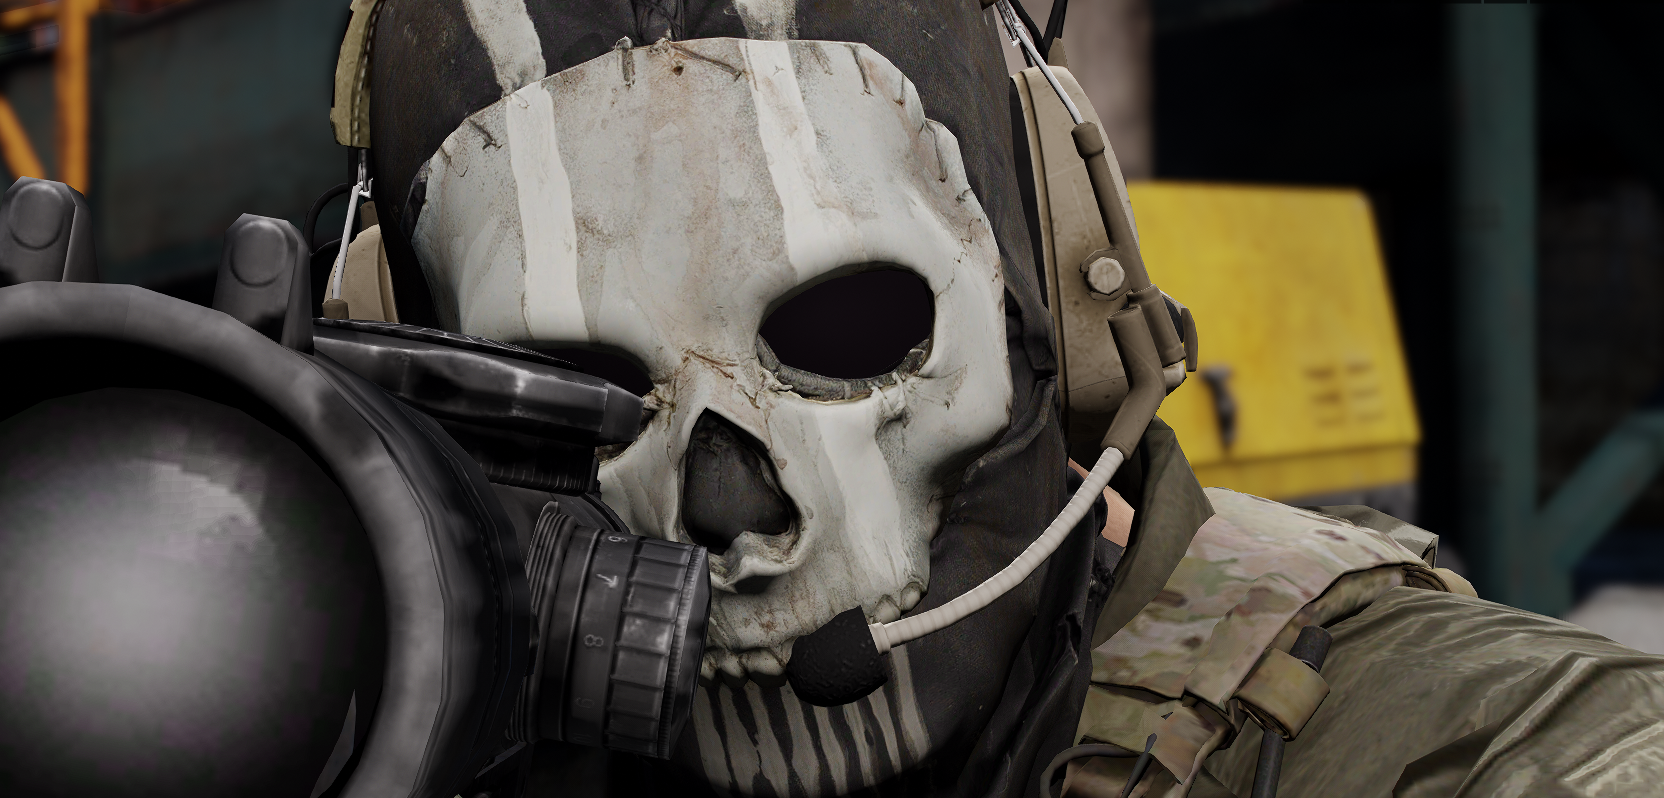 MAKING: Ghost's Mask From COD MW2 